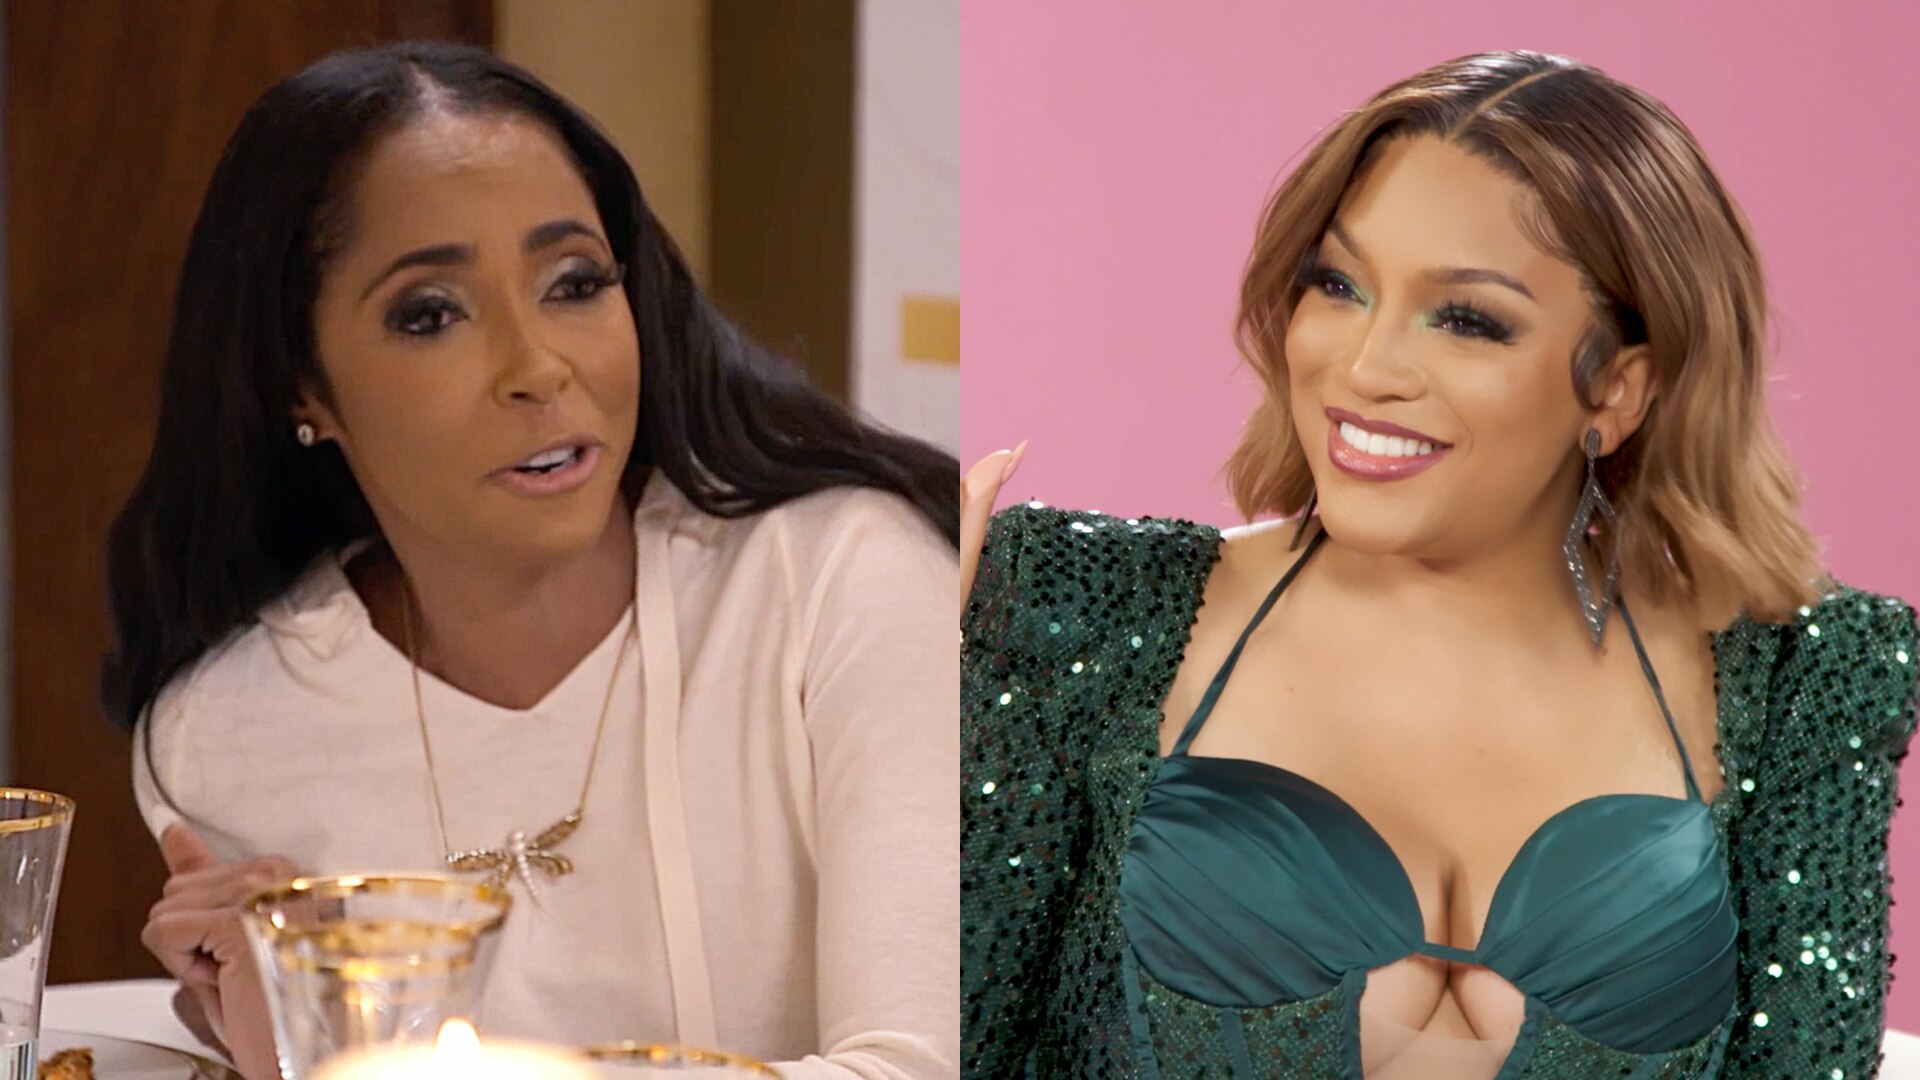 RHOA Cast Dish on Drew's Beef With Courtney, Kenya's Man and More